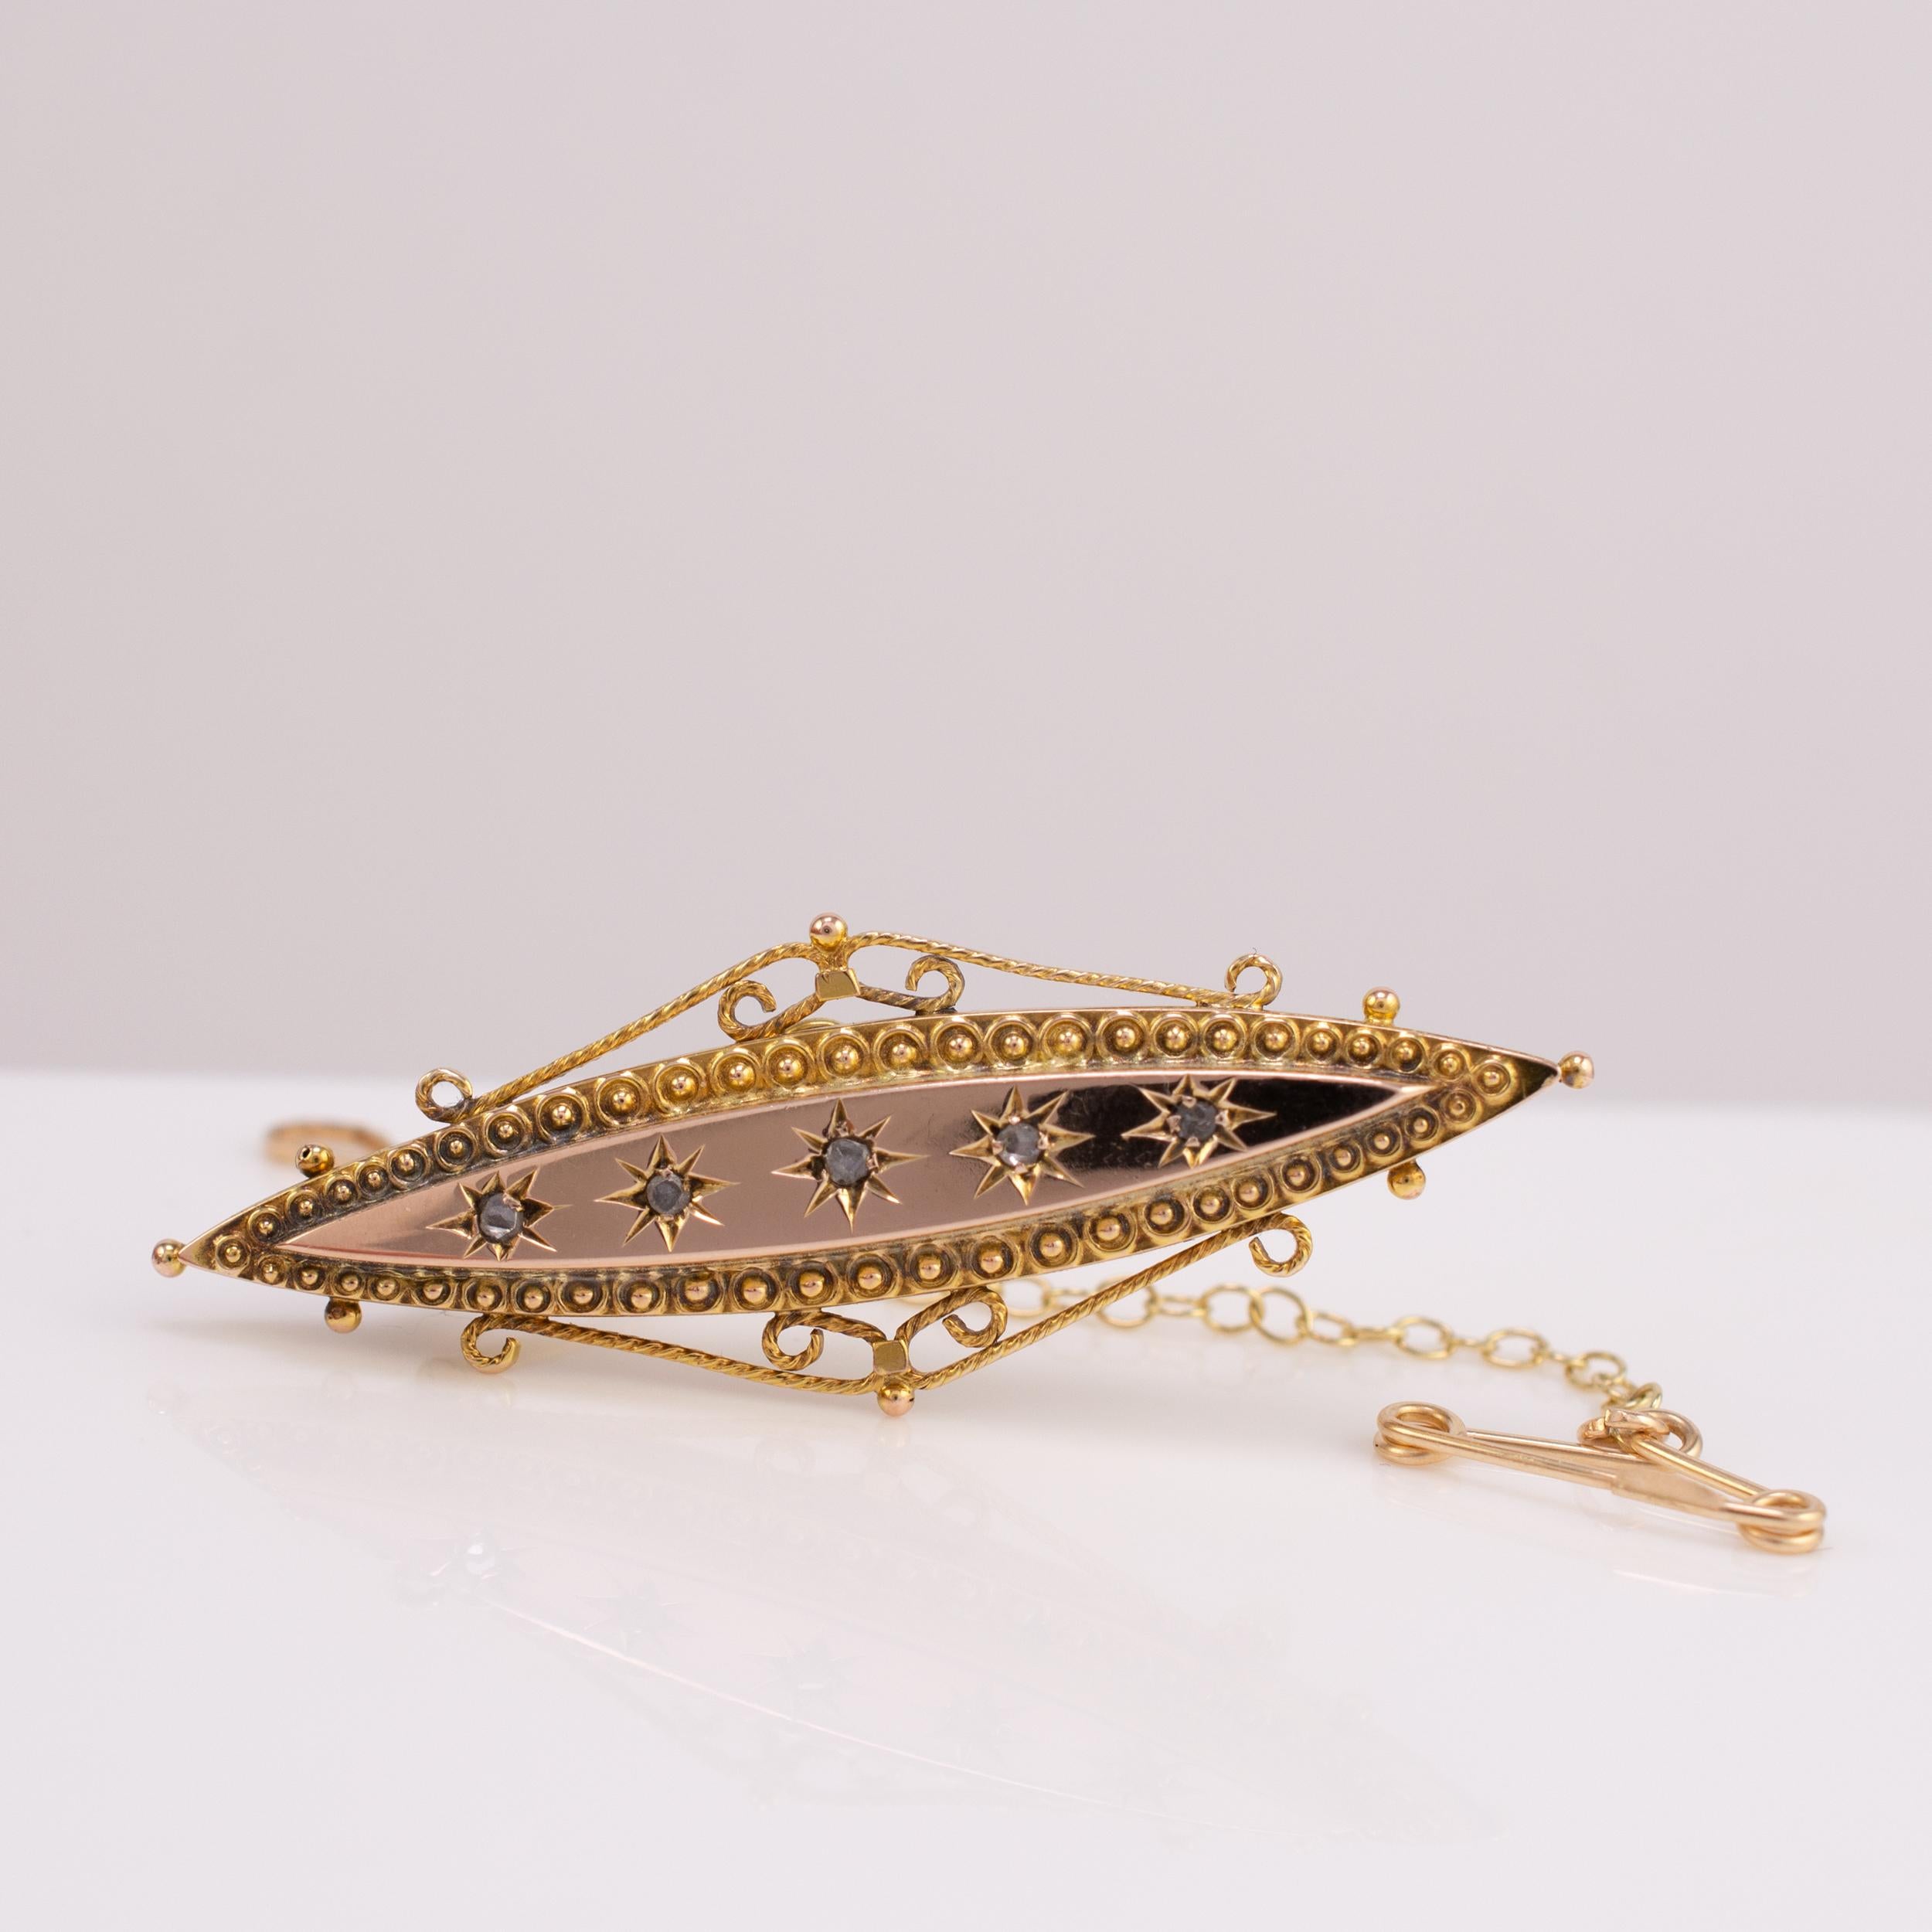 A fine quality antique diamond brooch dated Chester 1900.

The smooth rose gold platform is set with five old rose cut diamonds set in stars. The lower lip, in yellow gold, is decorated with chased circle and ball applied filigree detail Intricate